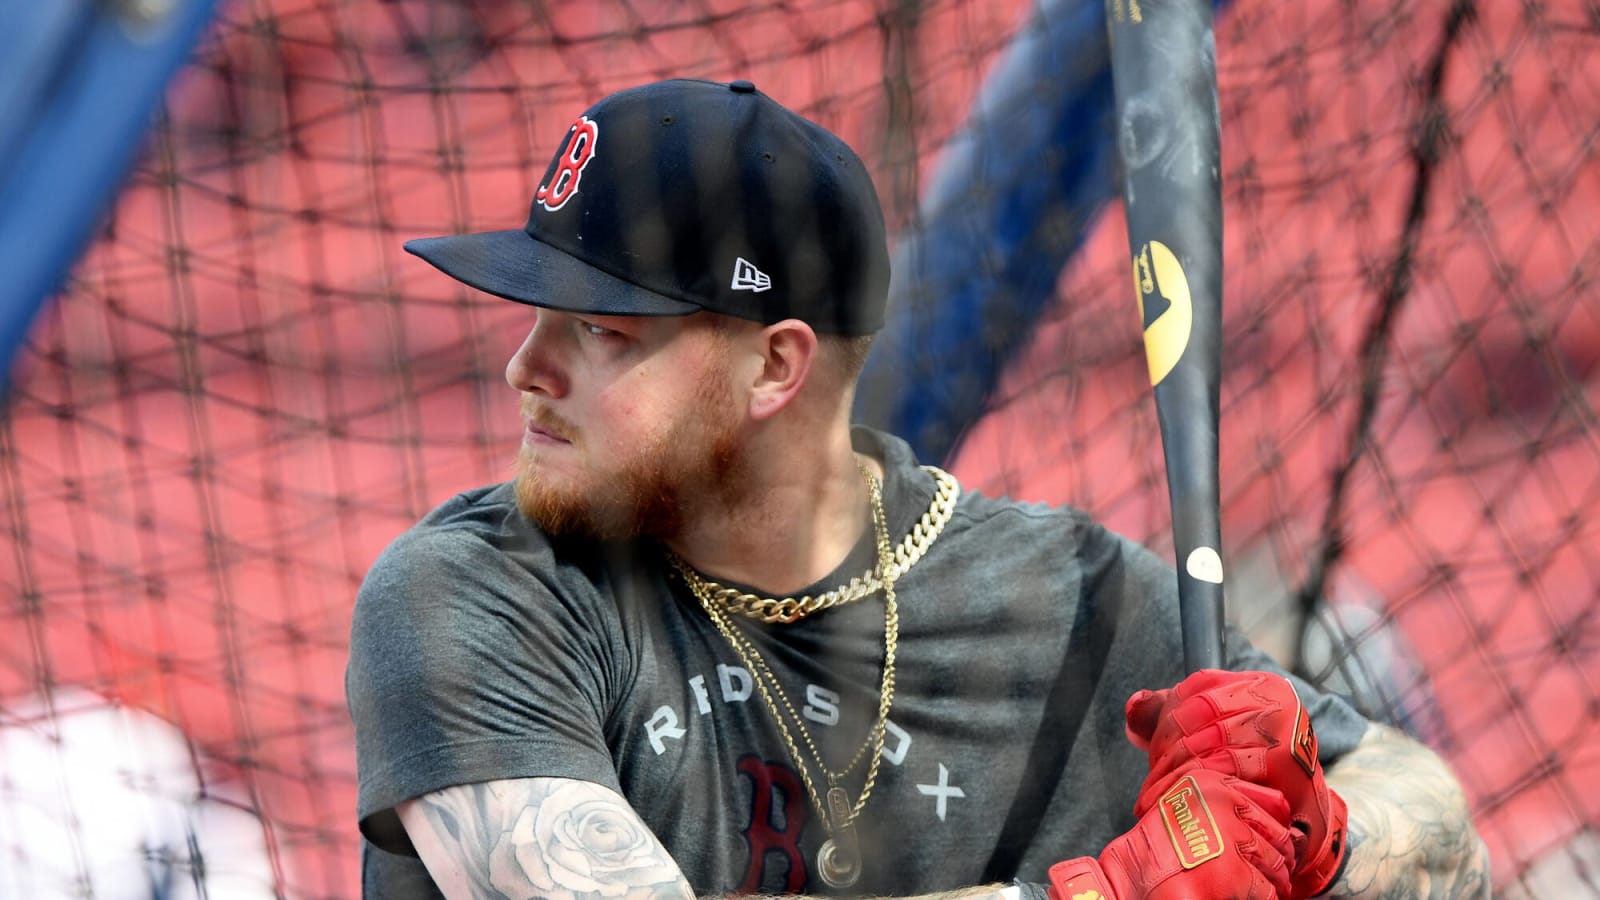 Alex Verdugo comes through with 2 clutch hits to help Red Sox avoid getting swept by Blue Jays in 6-5 win